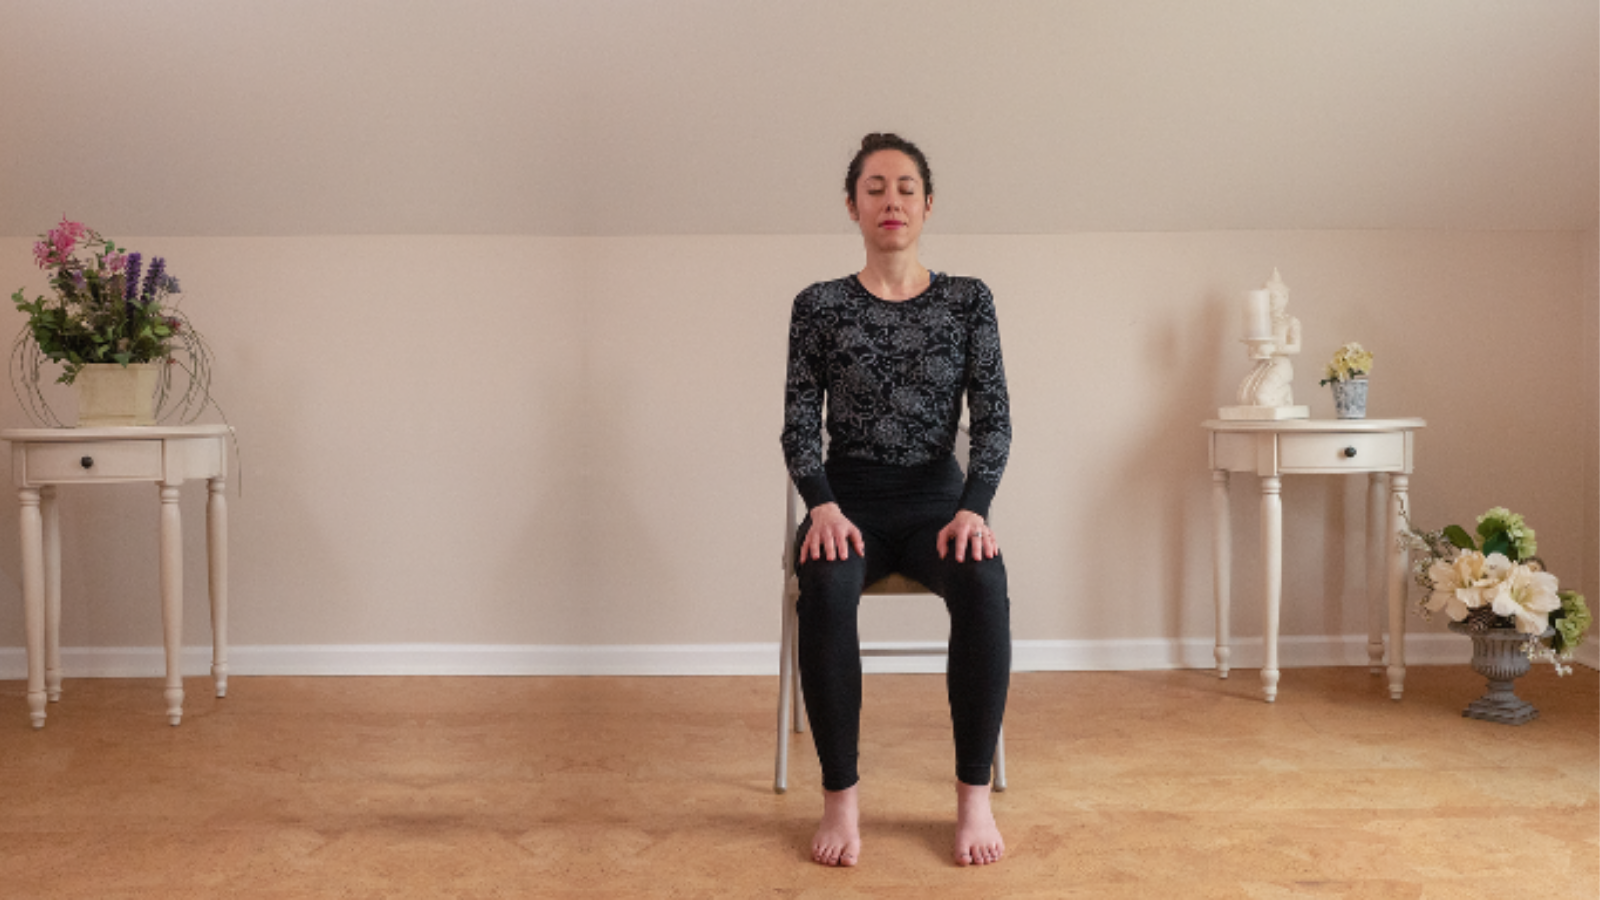 Yoga Student doing exercises at home using chair in preparation for breath work